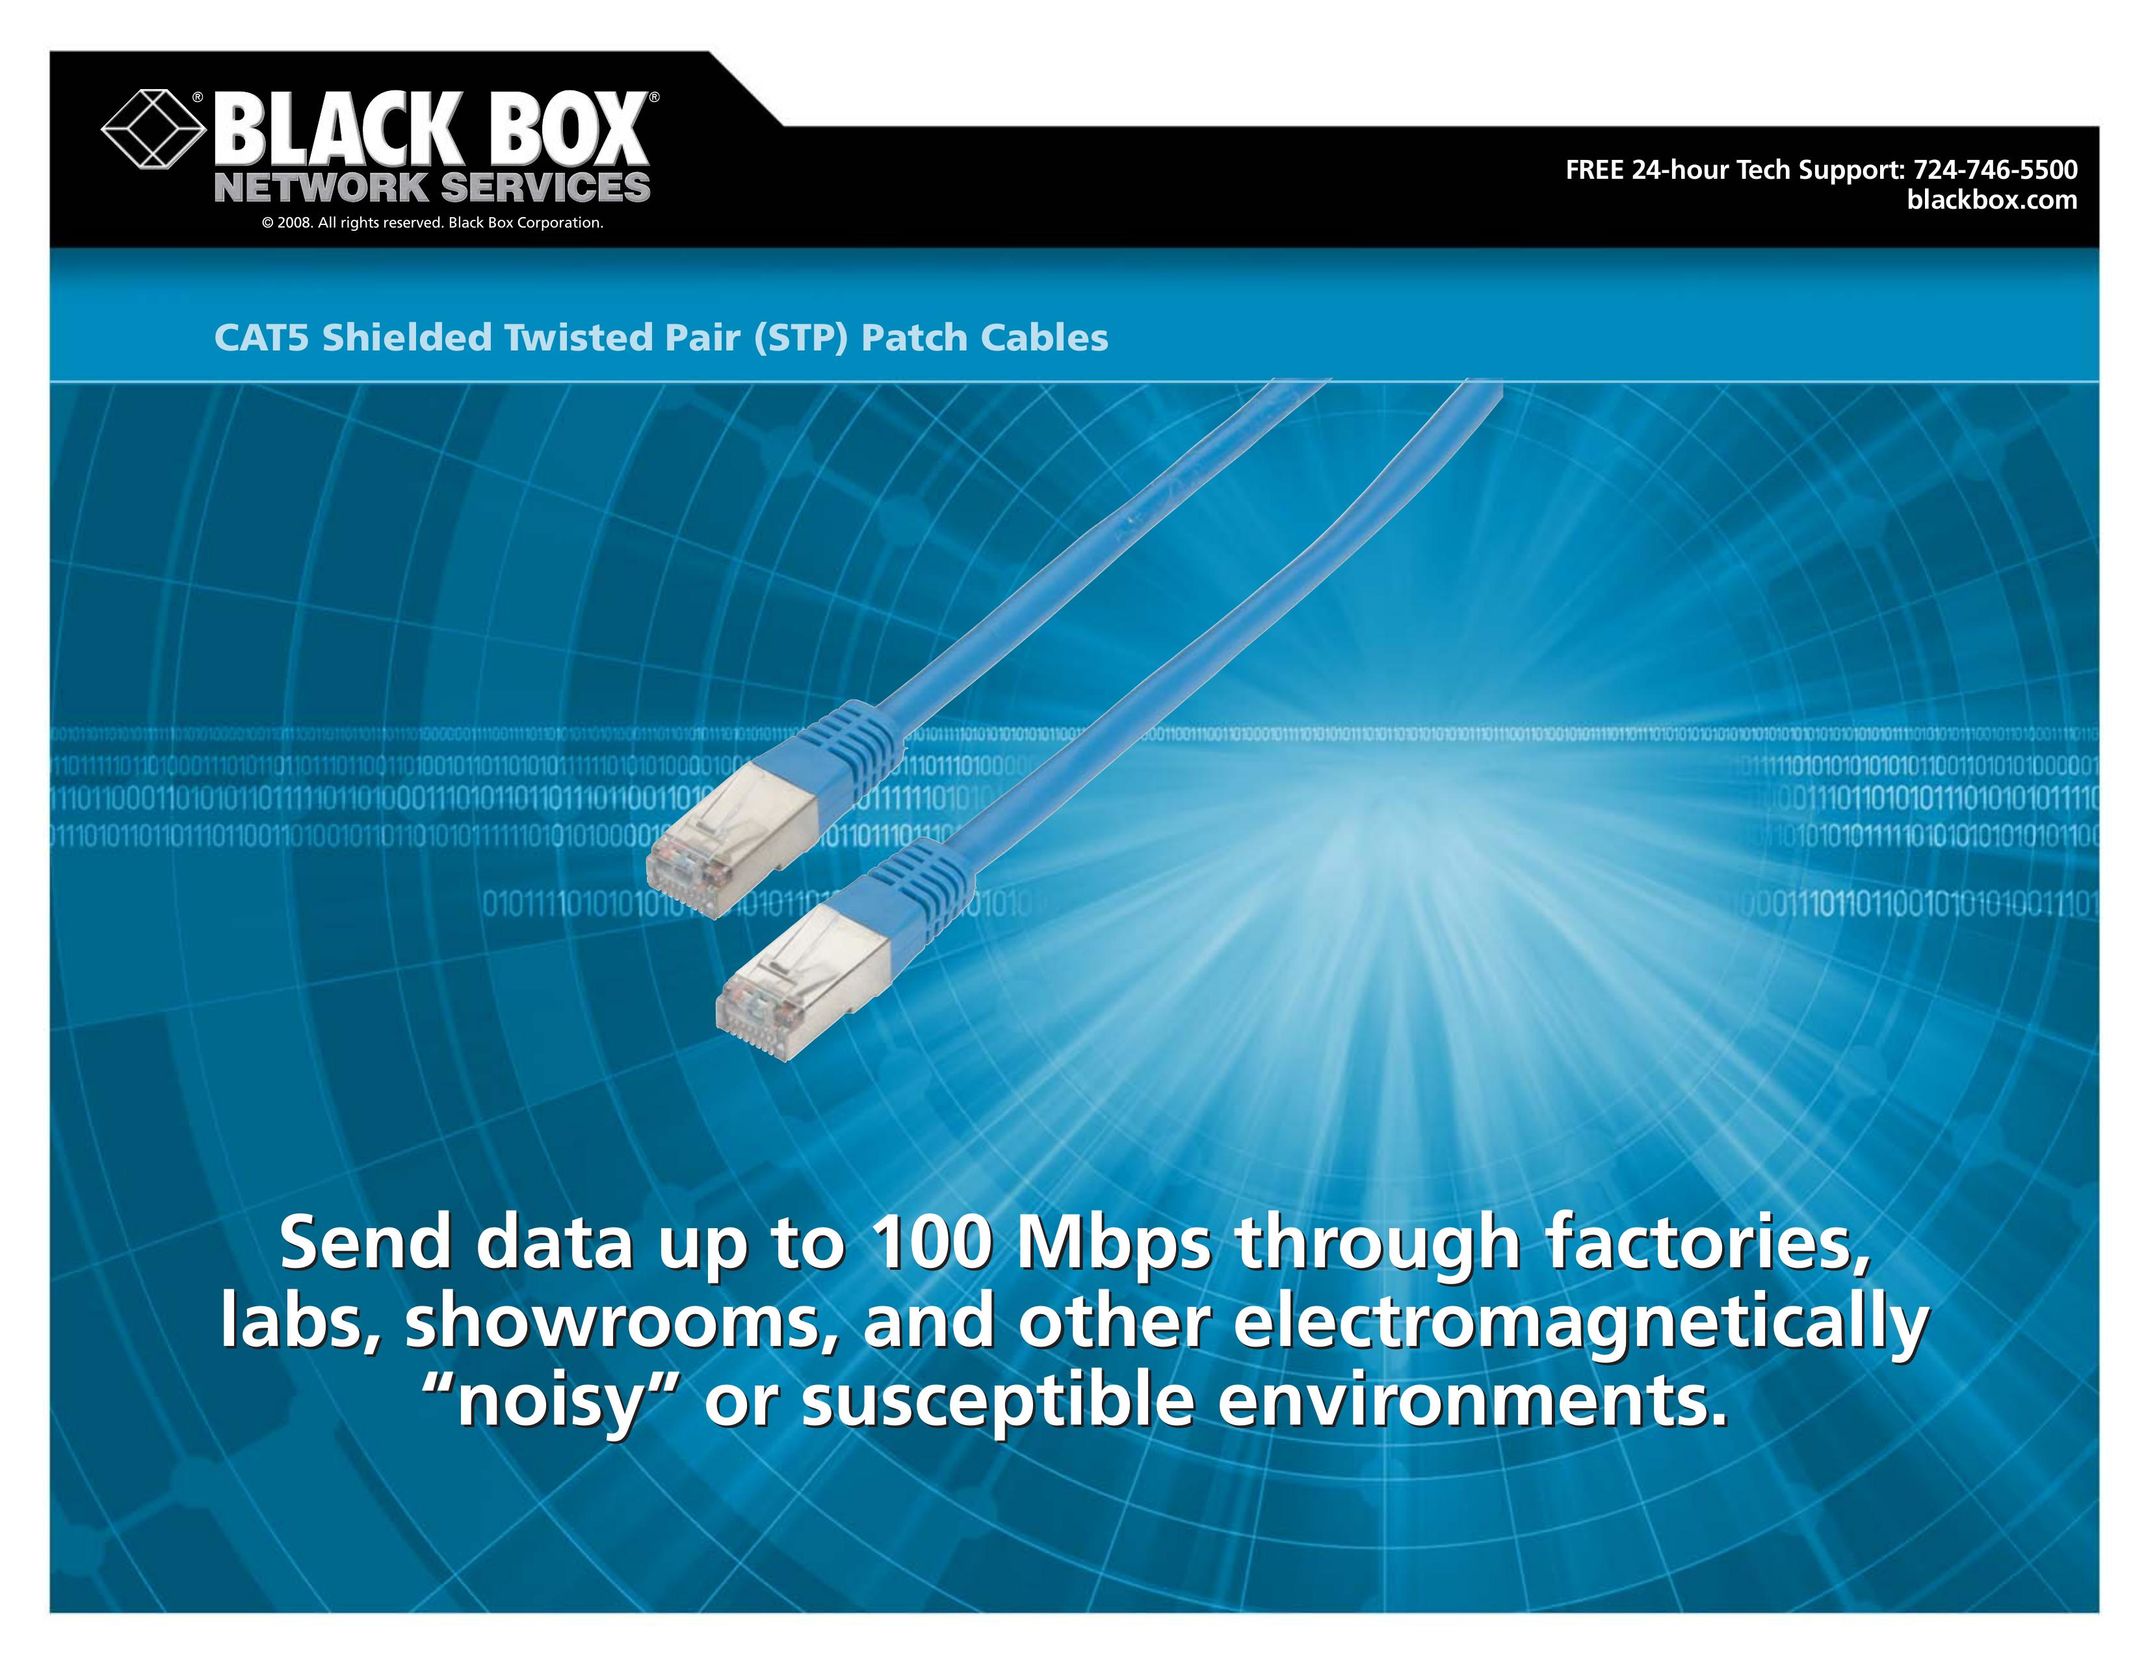 Black Box CAT5 Shielded Twisted Pair (STP) Patch Cable Computer Hardware User Manual